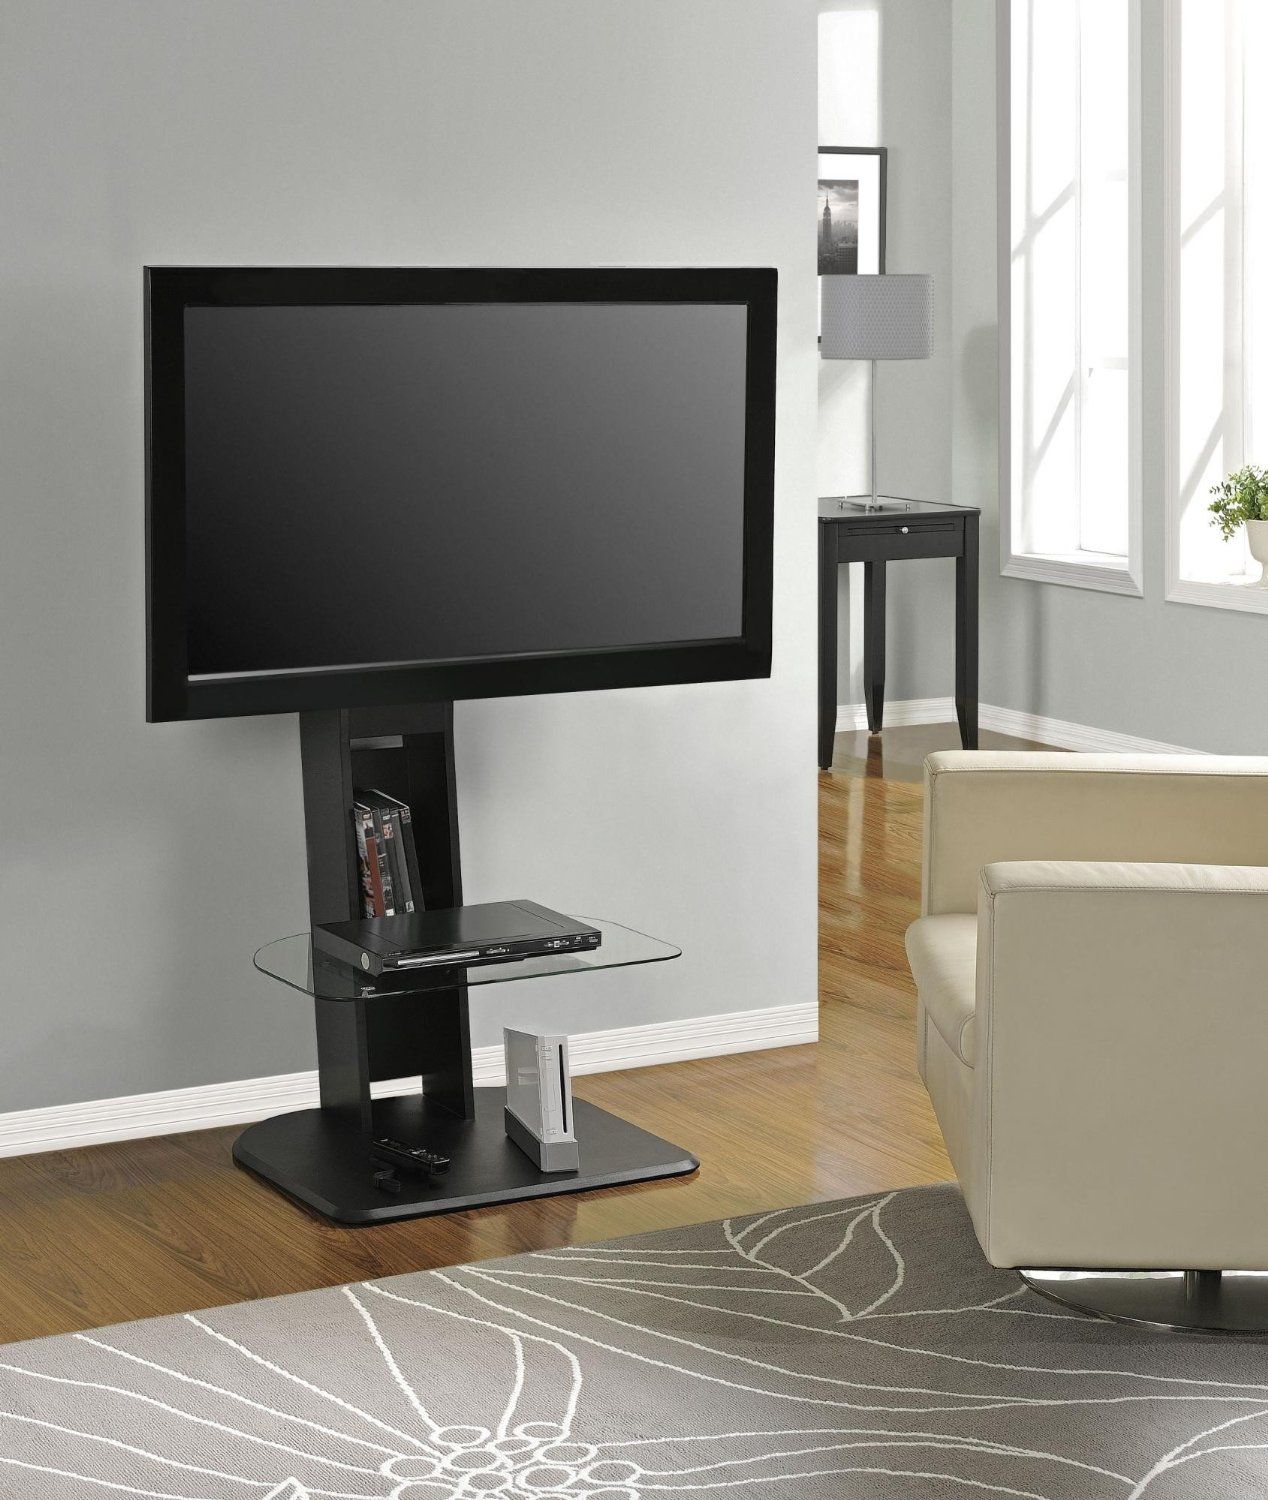 Cool Flat Screen Tv Stands With Mount – Homesfeed With Regard To Off Wall Tv Stands (View 4 of 15)